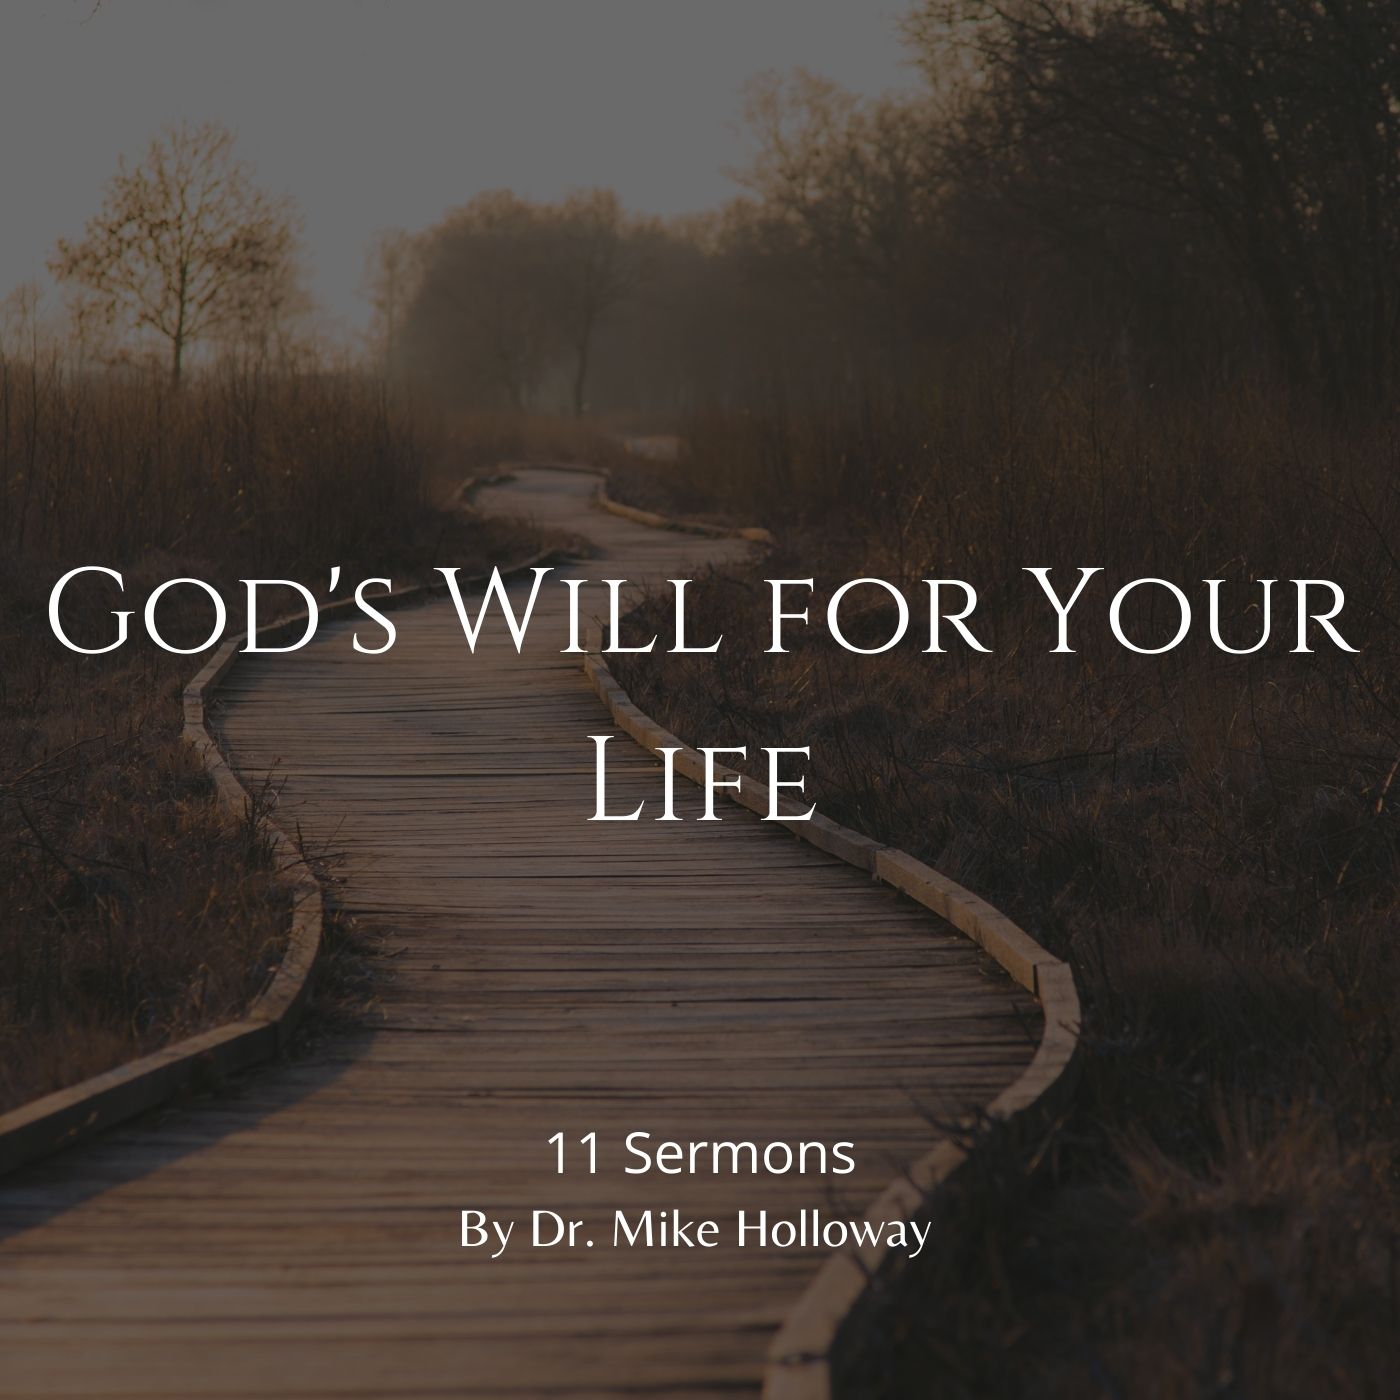 God’s Will for Your Life